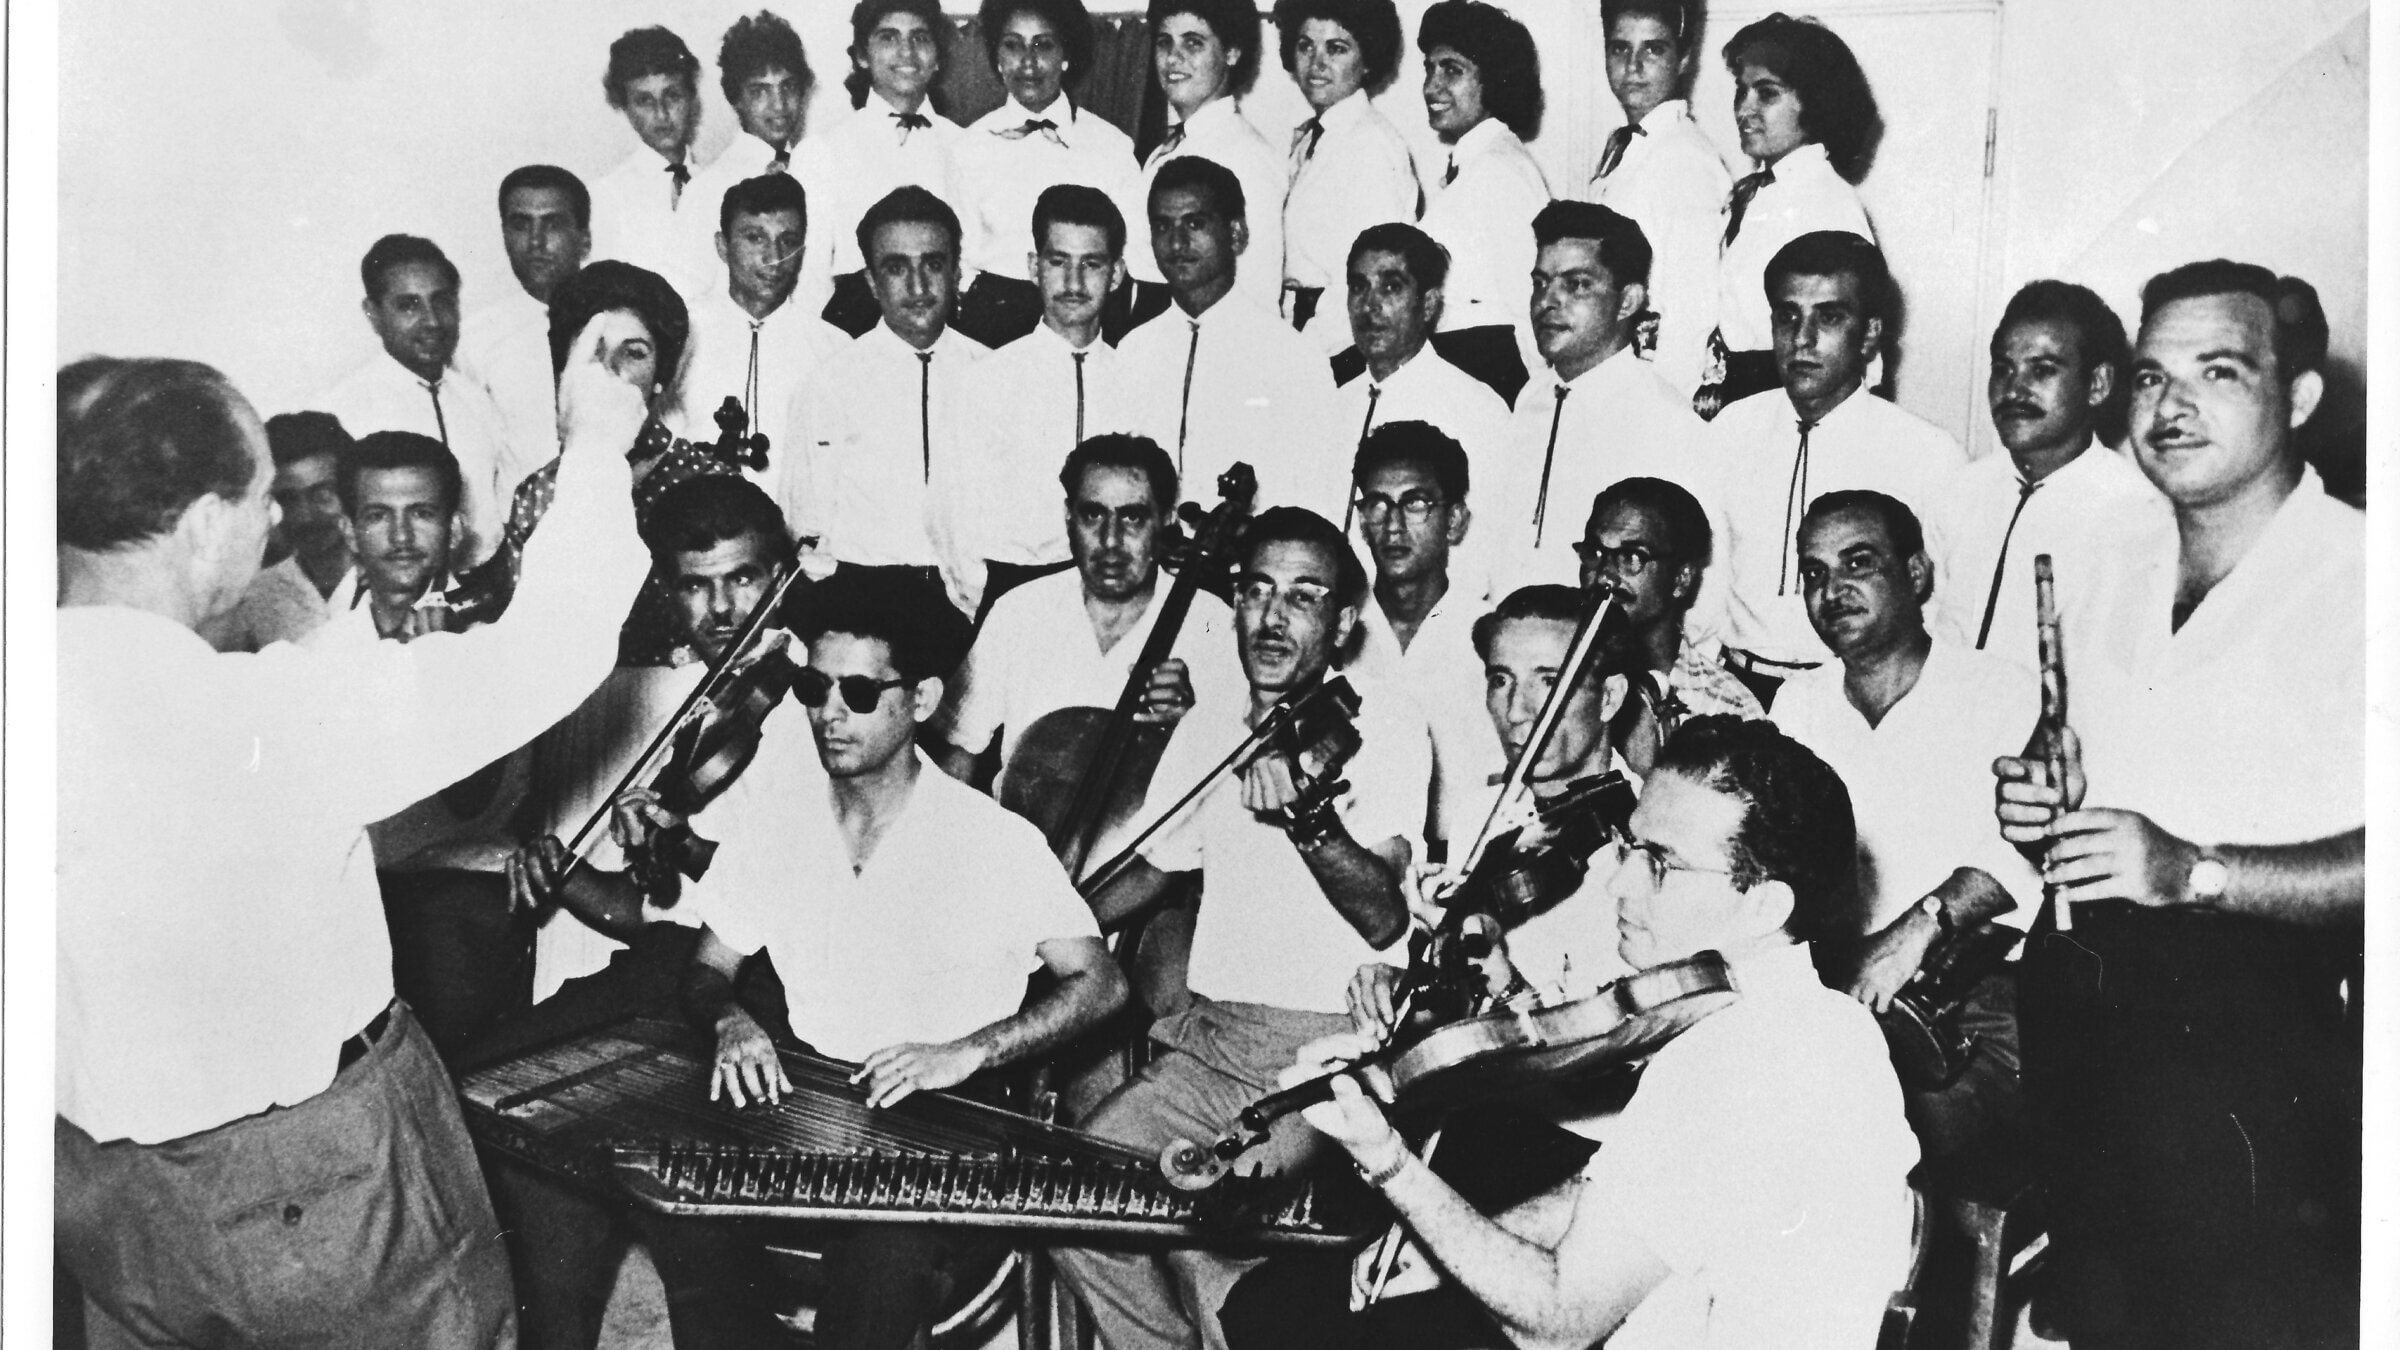 Avraham Salman (with dark glasses, center, bottom row) and the Israel Broadcasting Authority Orchestra rehearsing in the studio, circa 1959.